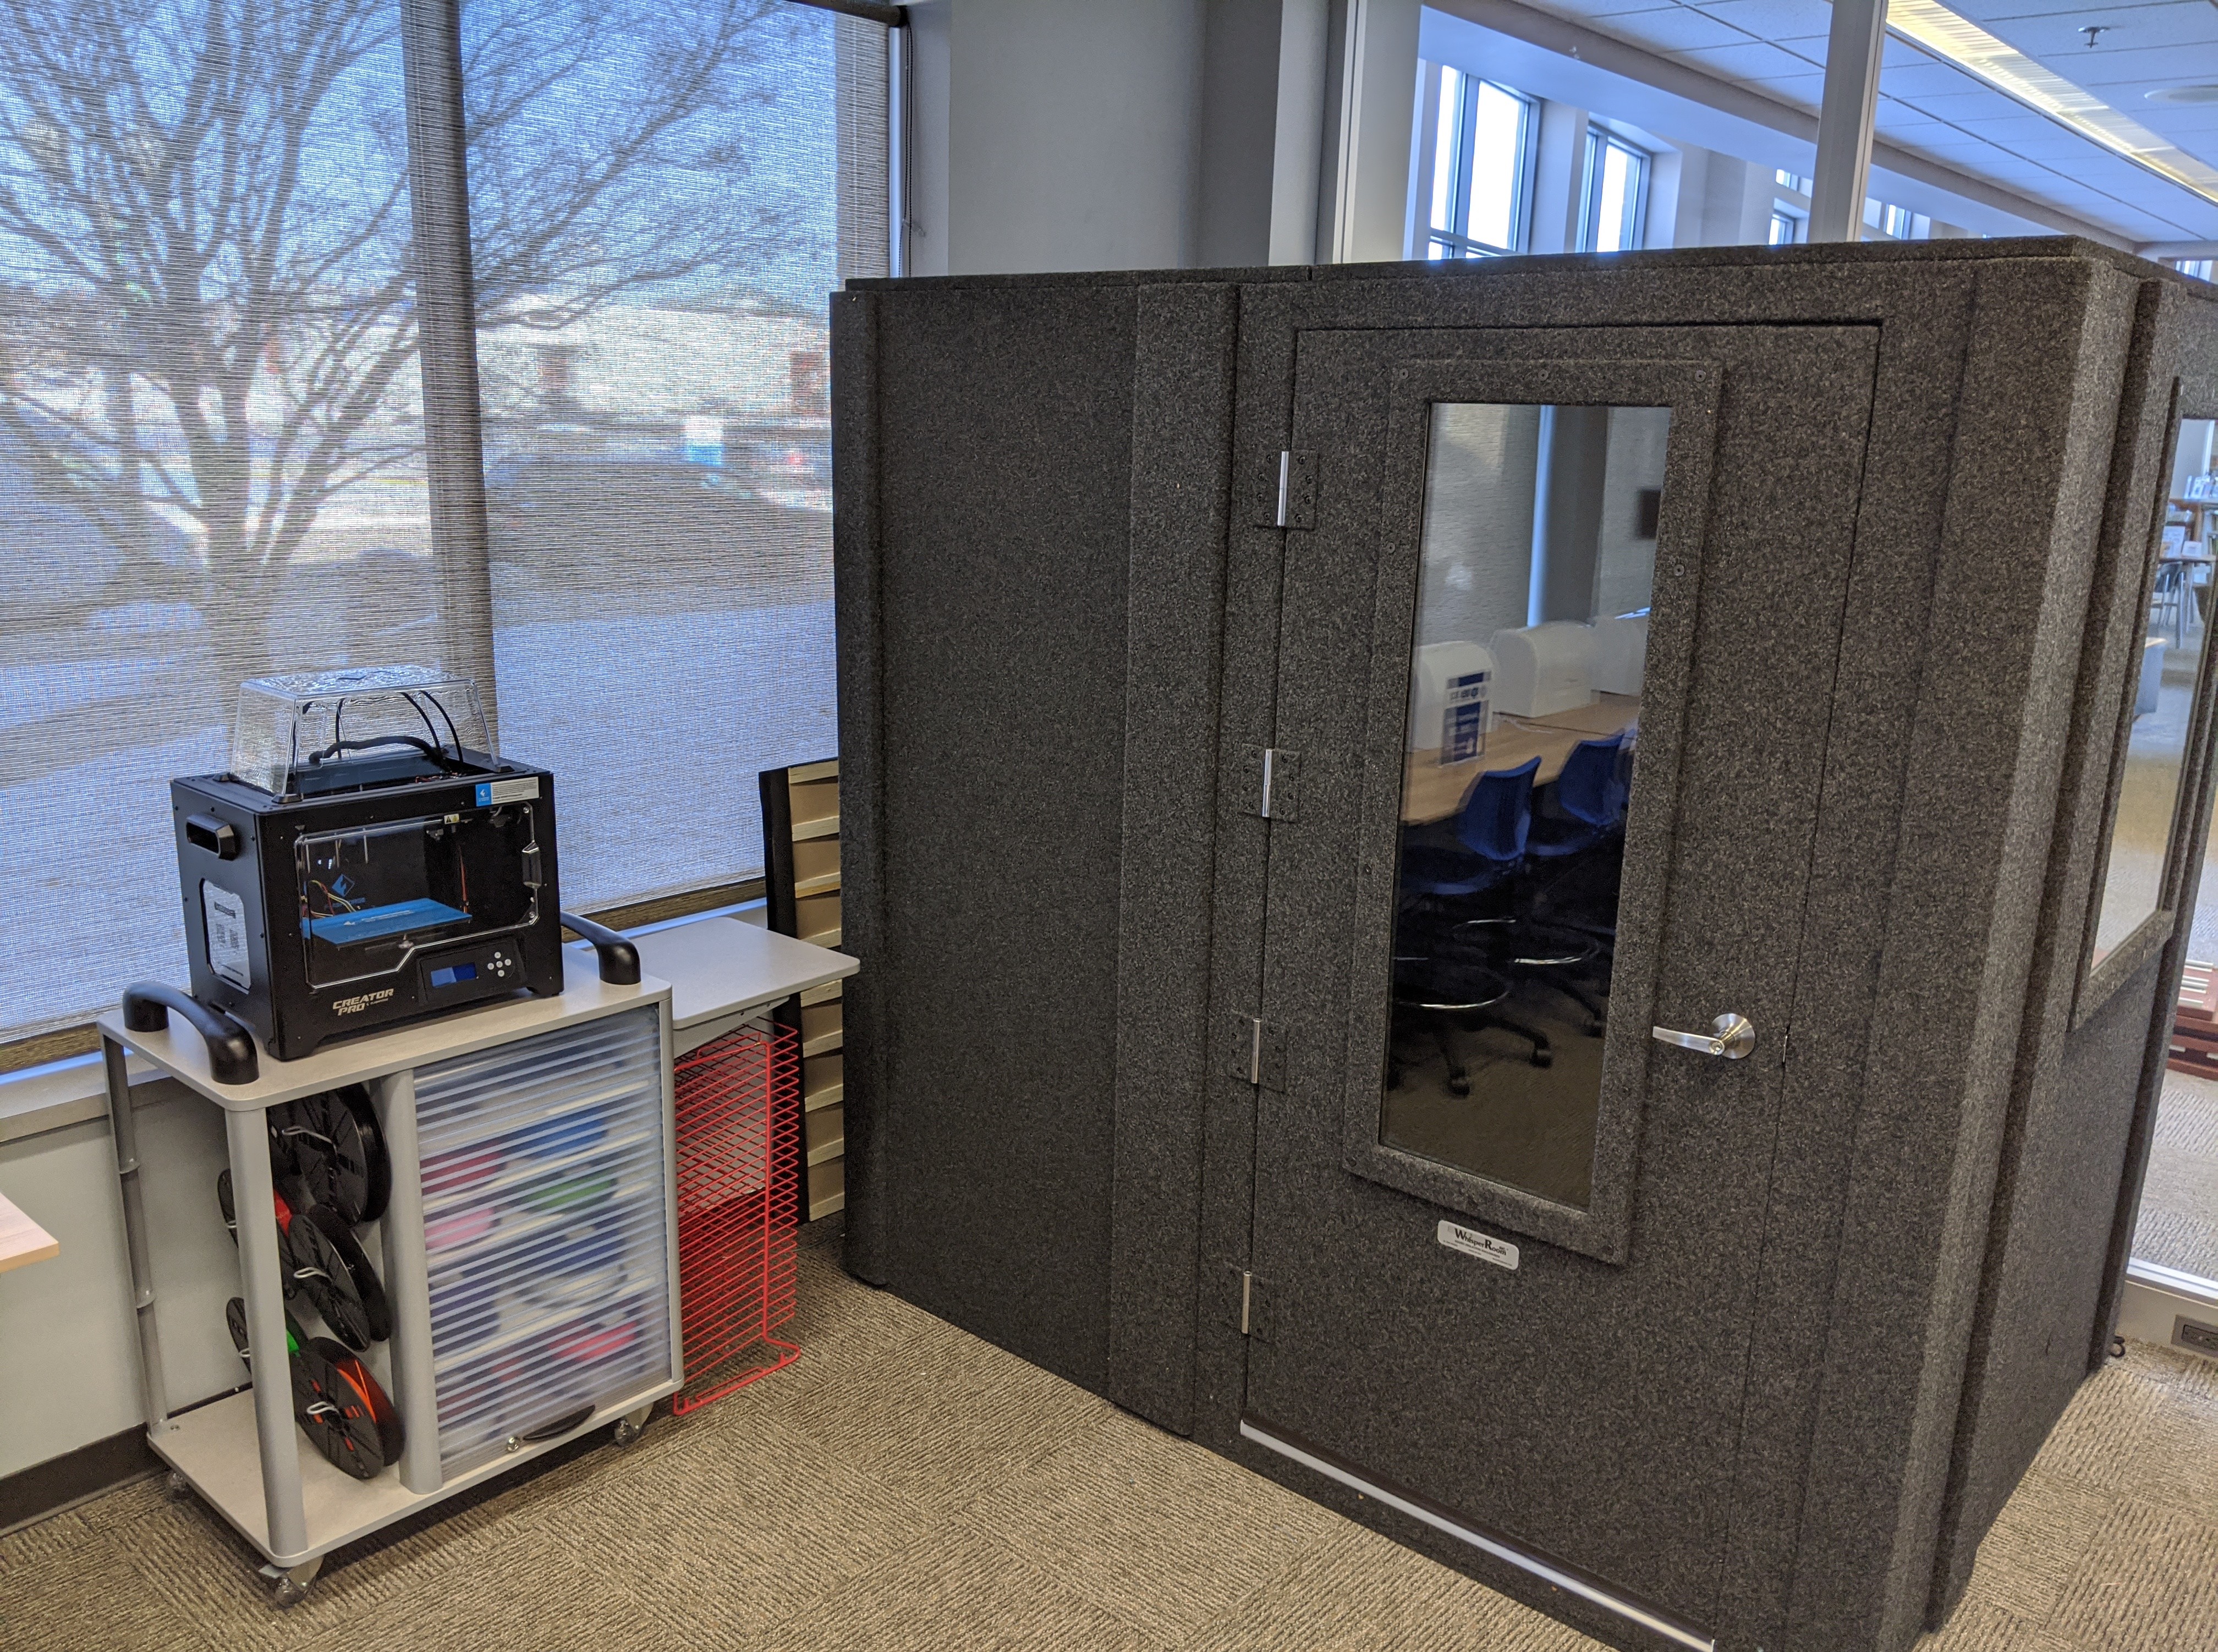 Sound booth and 3D printer stations in Idea Box